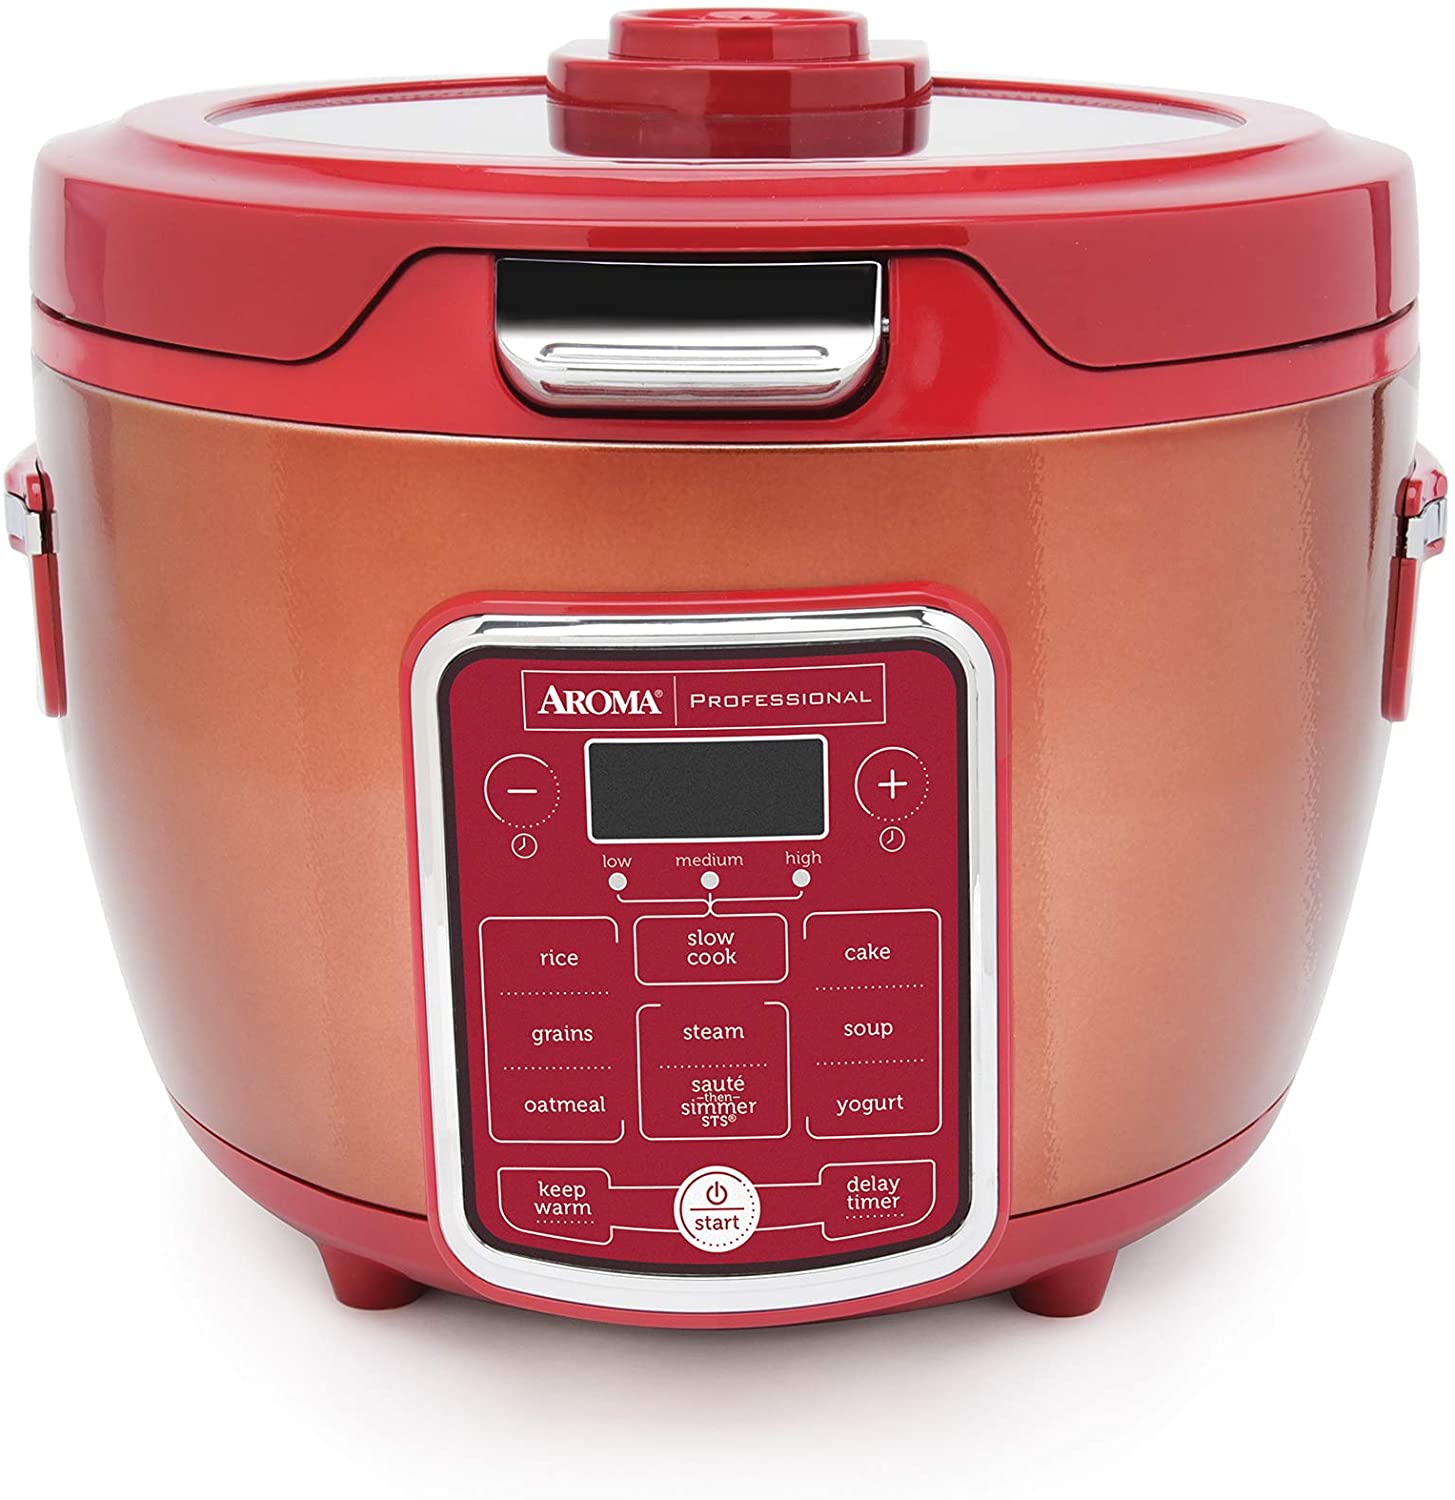 Aroma professional rice cooker instructions